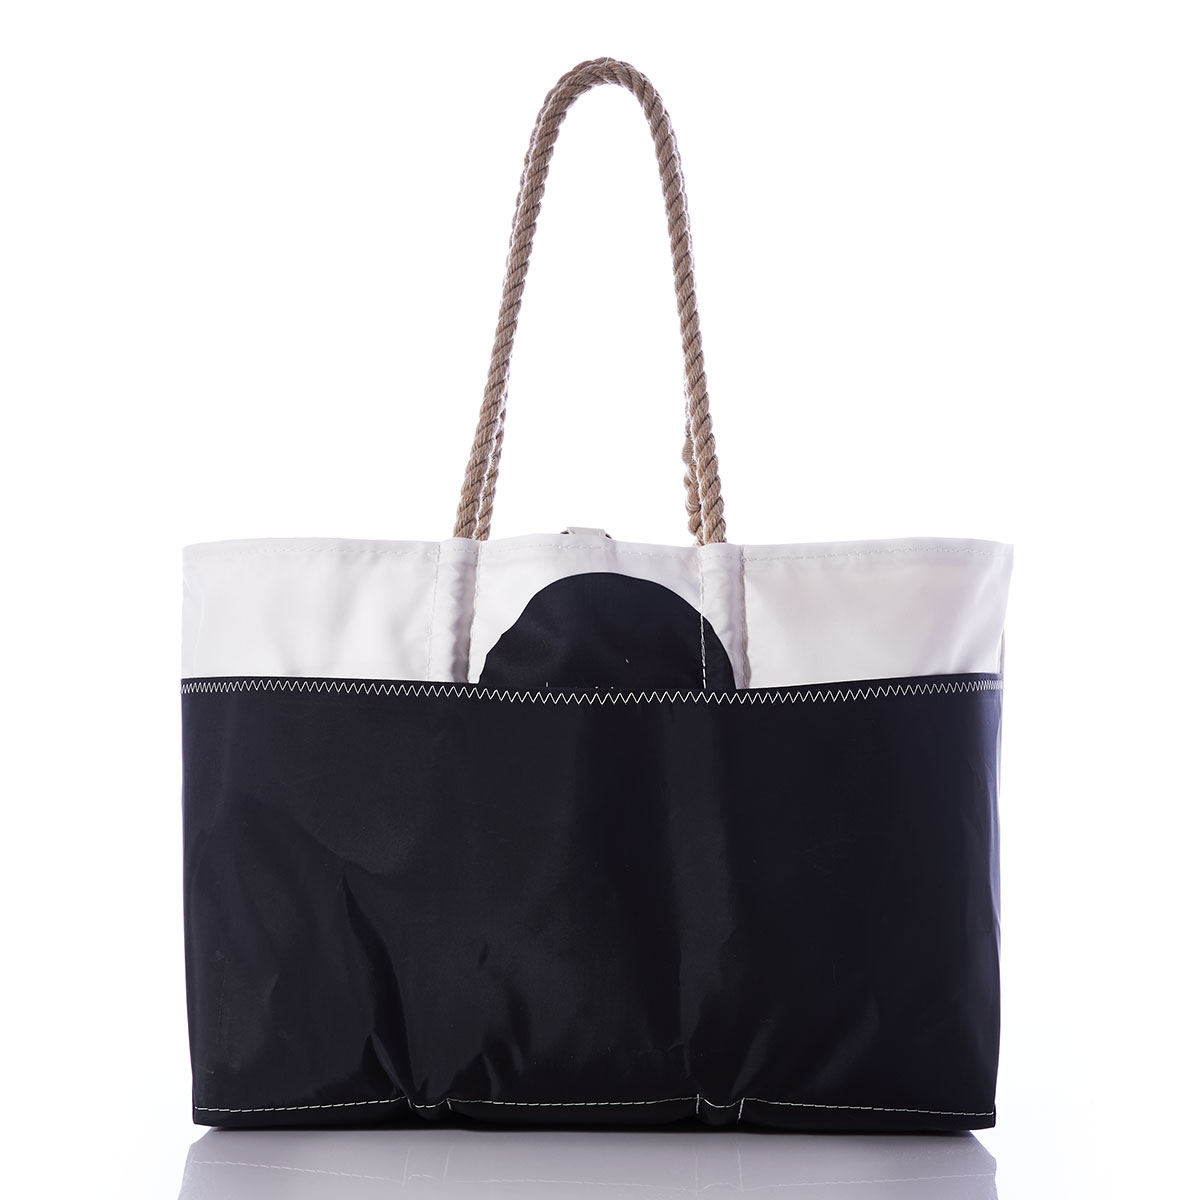 back view: black legs of an octopus reach up to the top of this recycled sail cloth tote, with a solid black along the bottom, and hemp rope handles